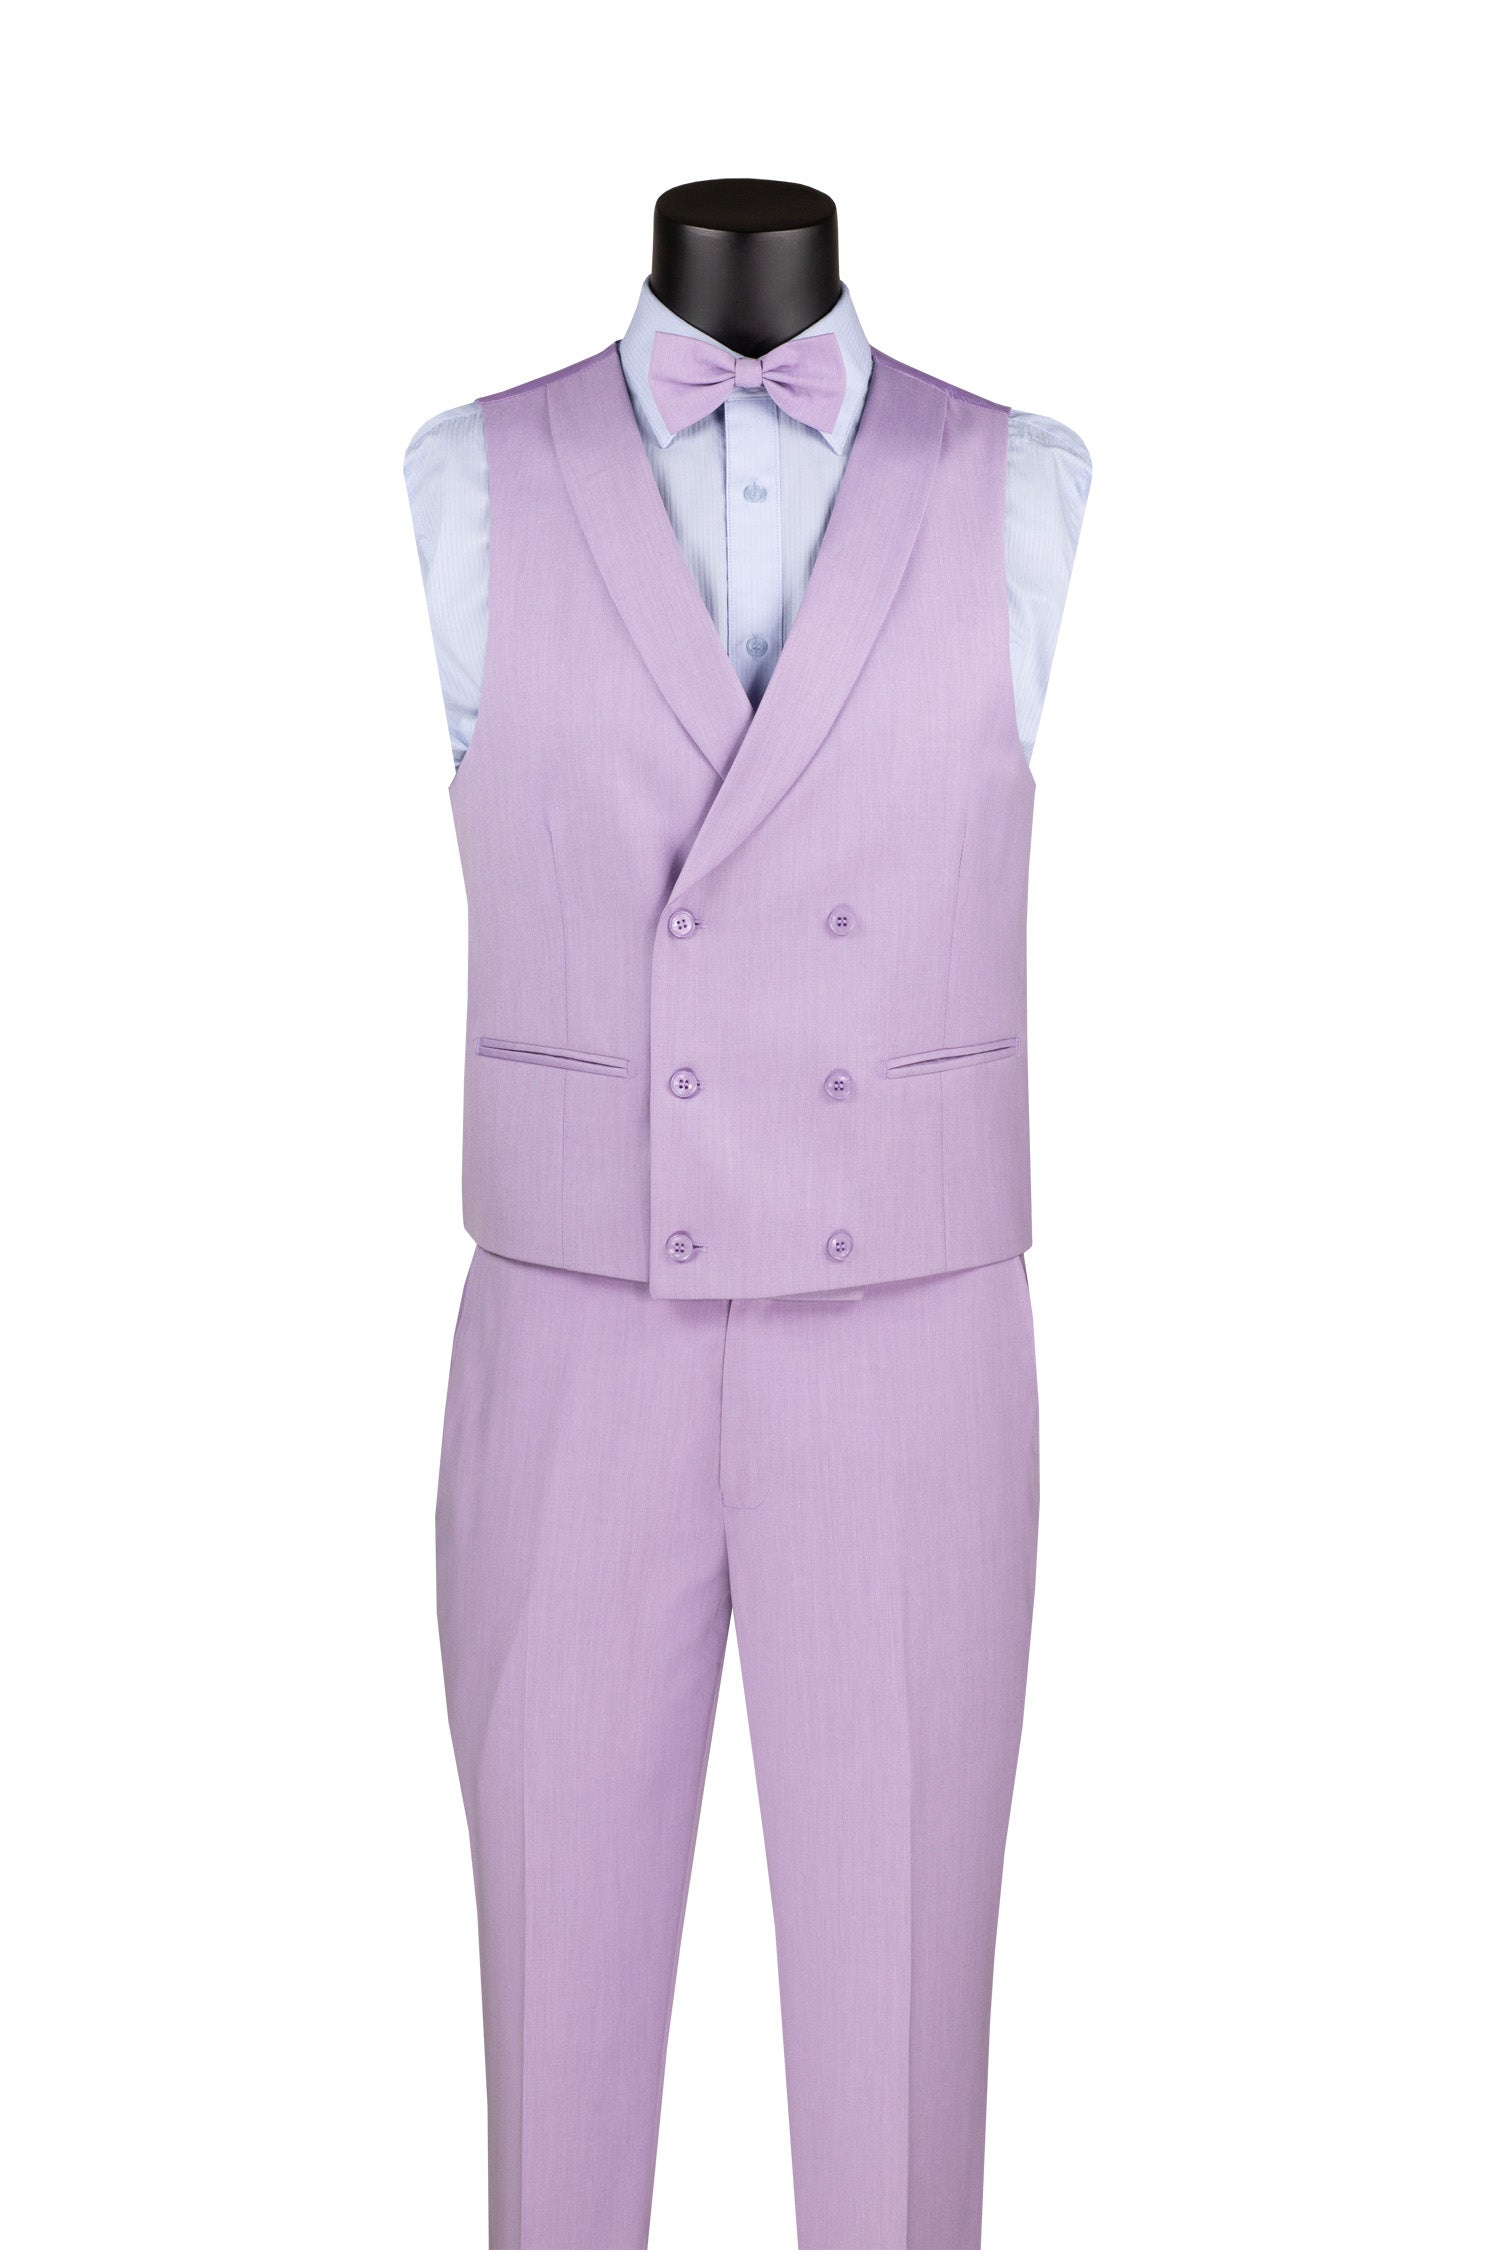 Slim Fit Tuxedo 3 Piece with Matching Bow Tie in Lavender